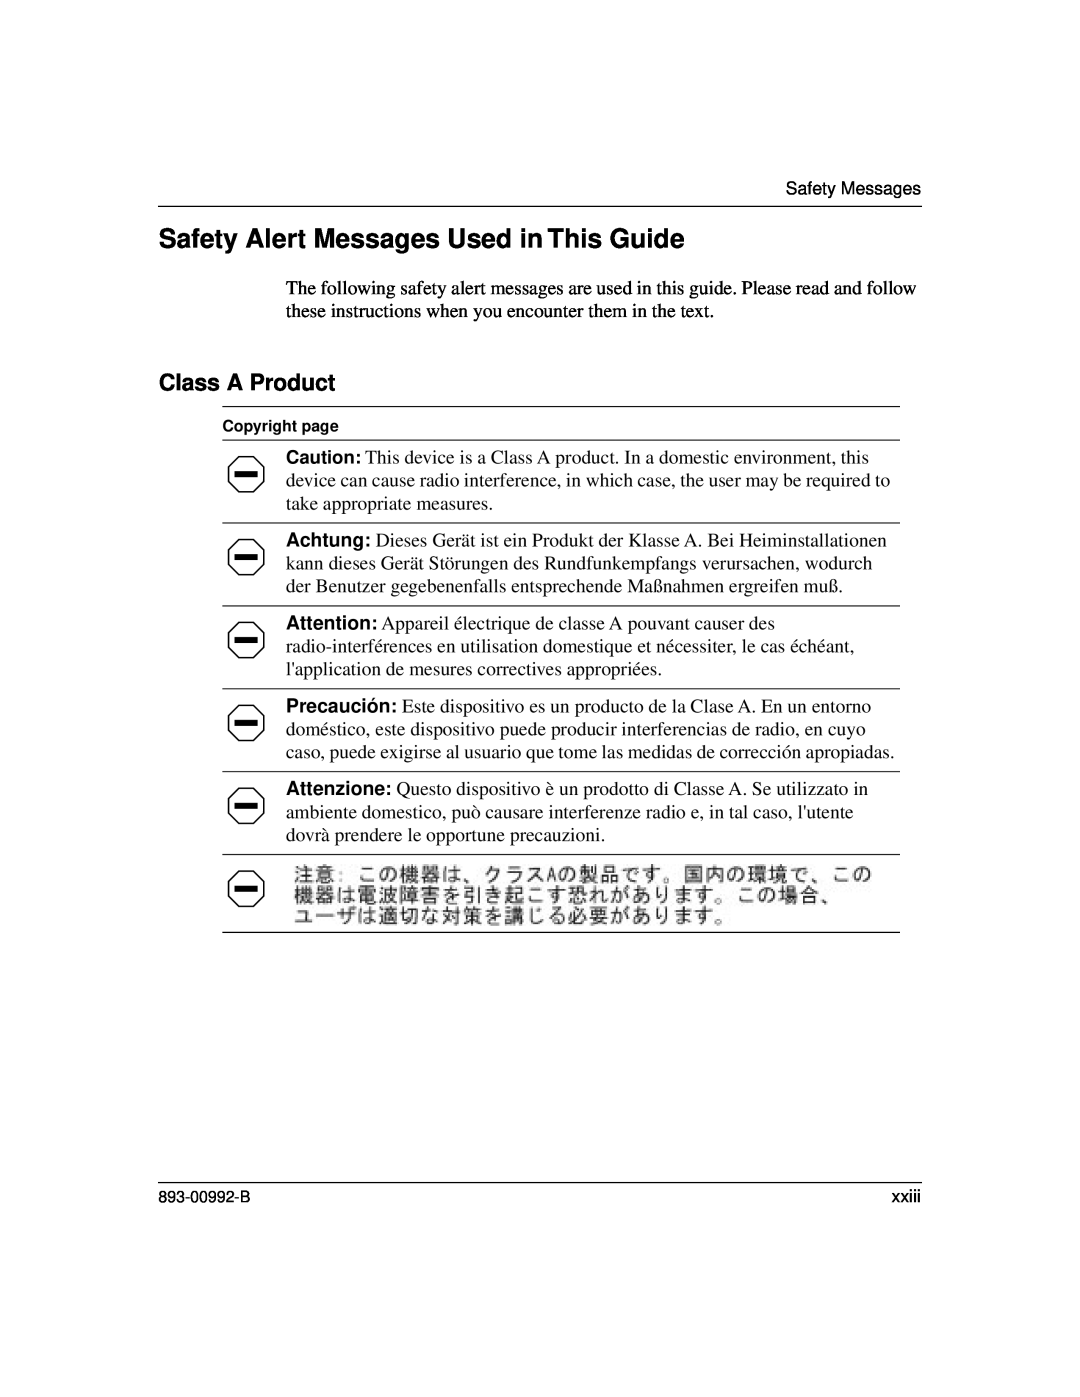 Bay Technical Associates 350 manual Safety Alert Messages Used in This Guide, Class A Product 